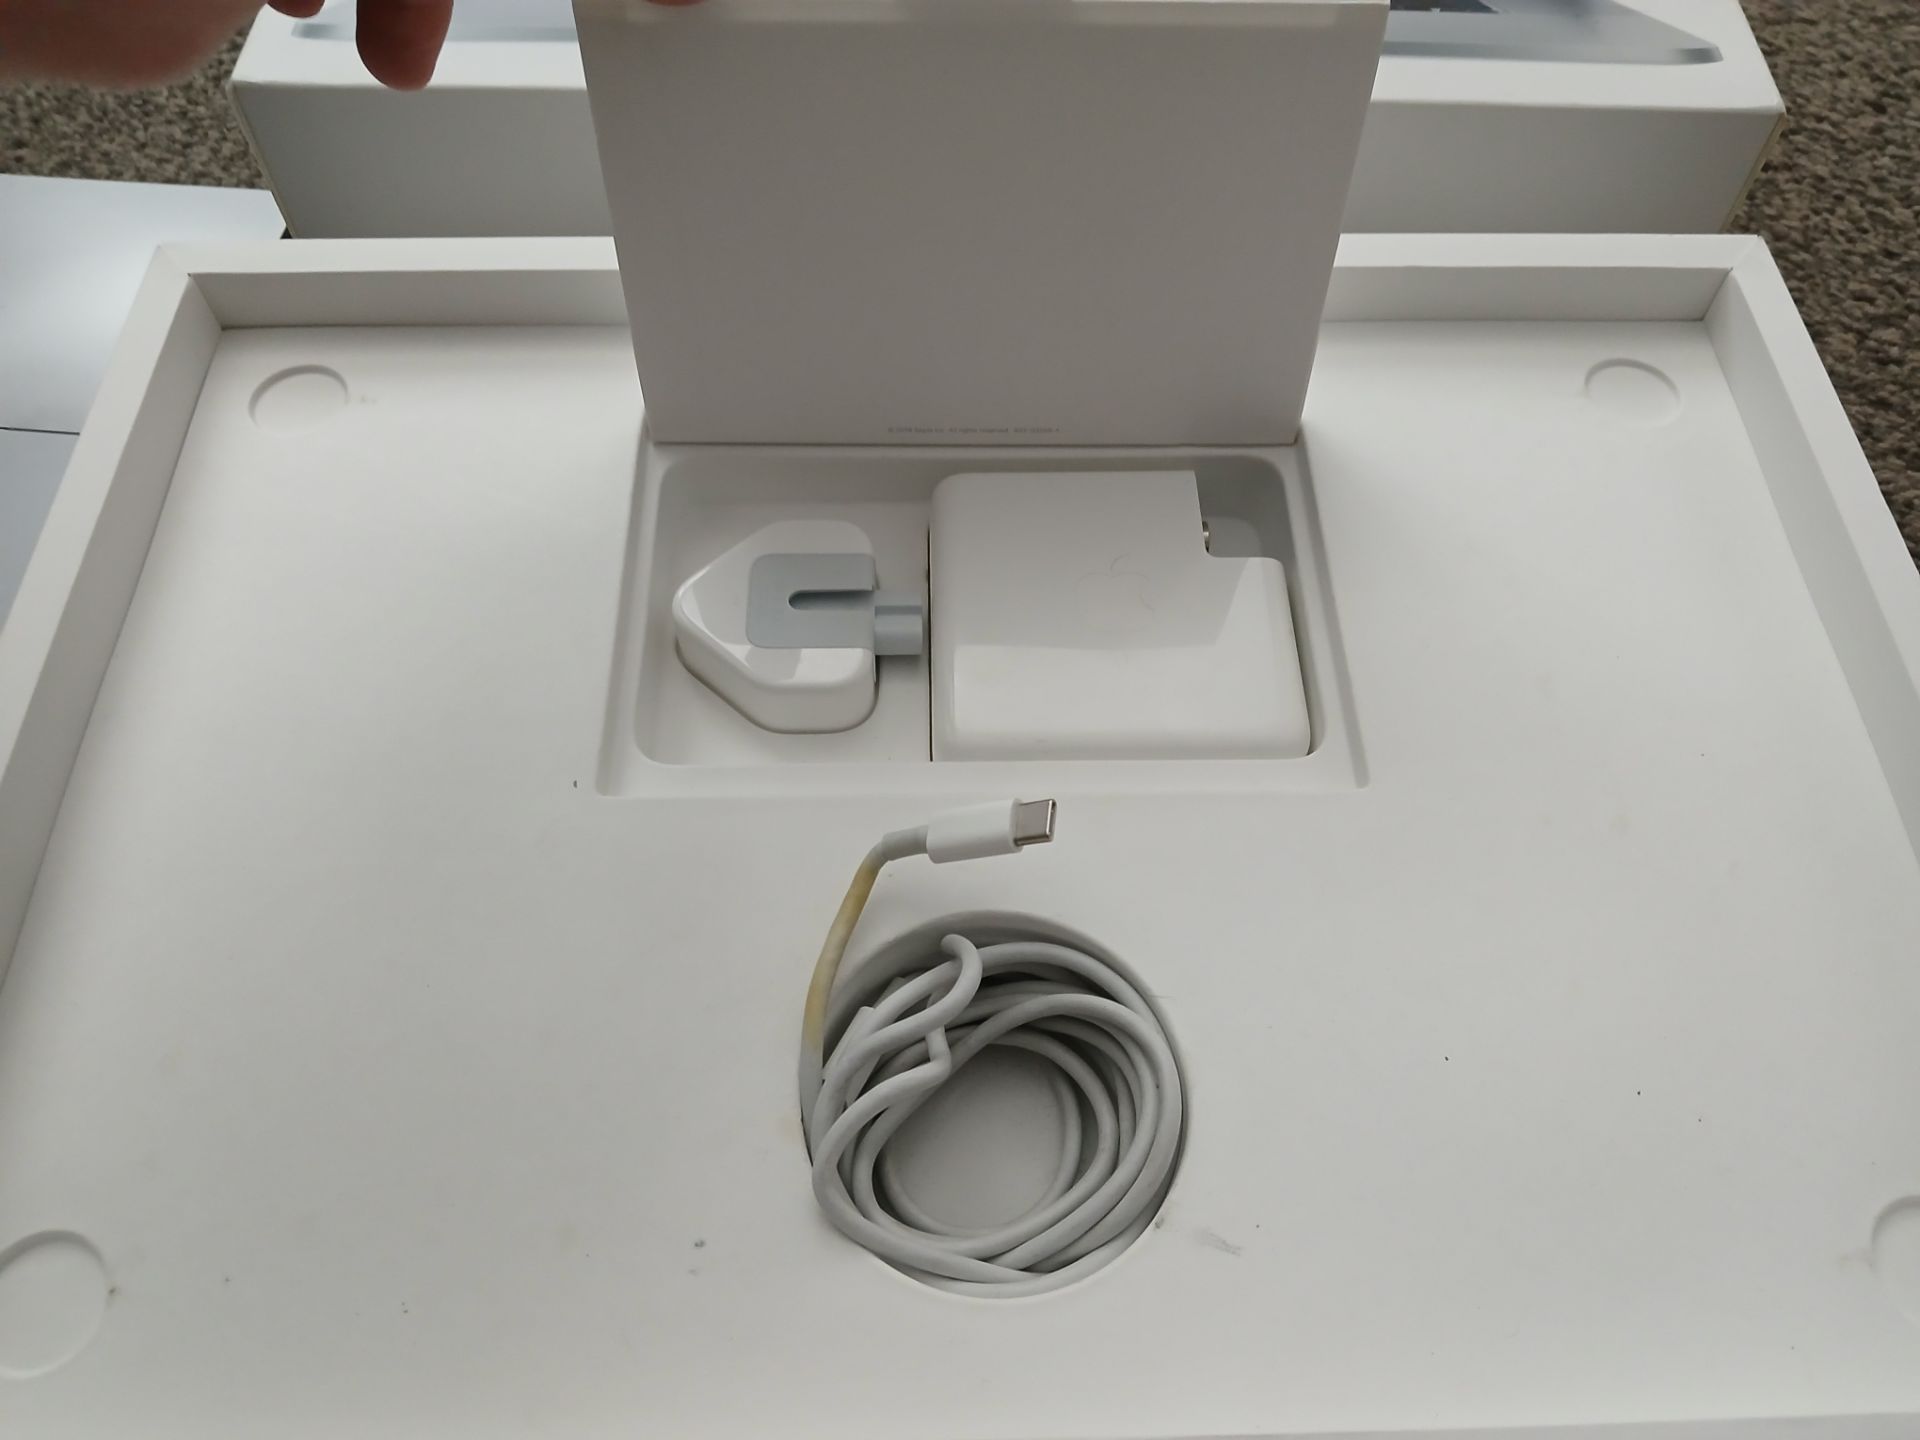 Apple MacBook Pro (16”, 2019) with charger, Serial Number C02DD108MD6M (Please refer to the pictures - Image 4 of 6